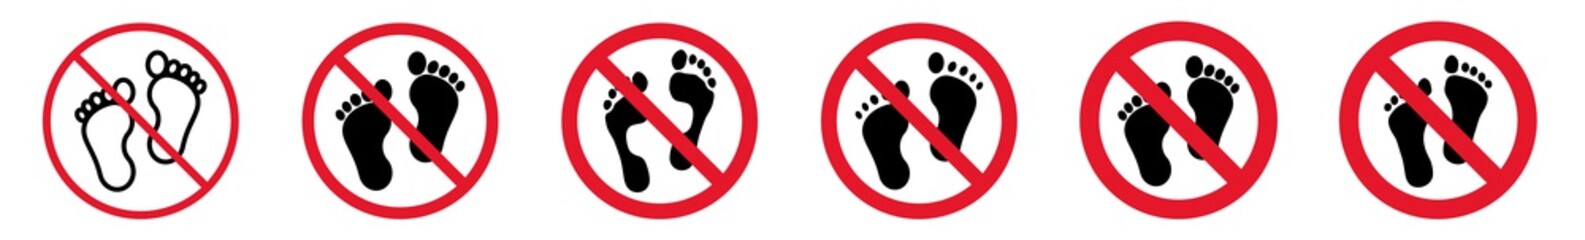 Prohibition Sign Footprints Forbidden Icon Set | Barefoot Prohibition Signs Prohibited Vector Illustration Logo | Human Foot Print Prohibition Sign Isolated Collection